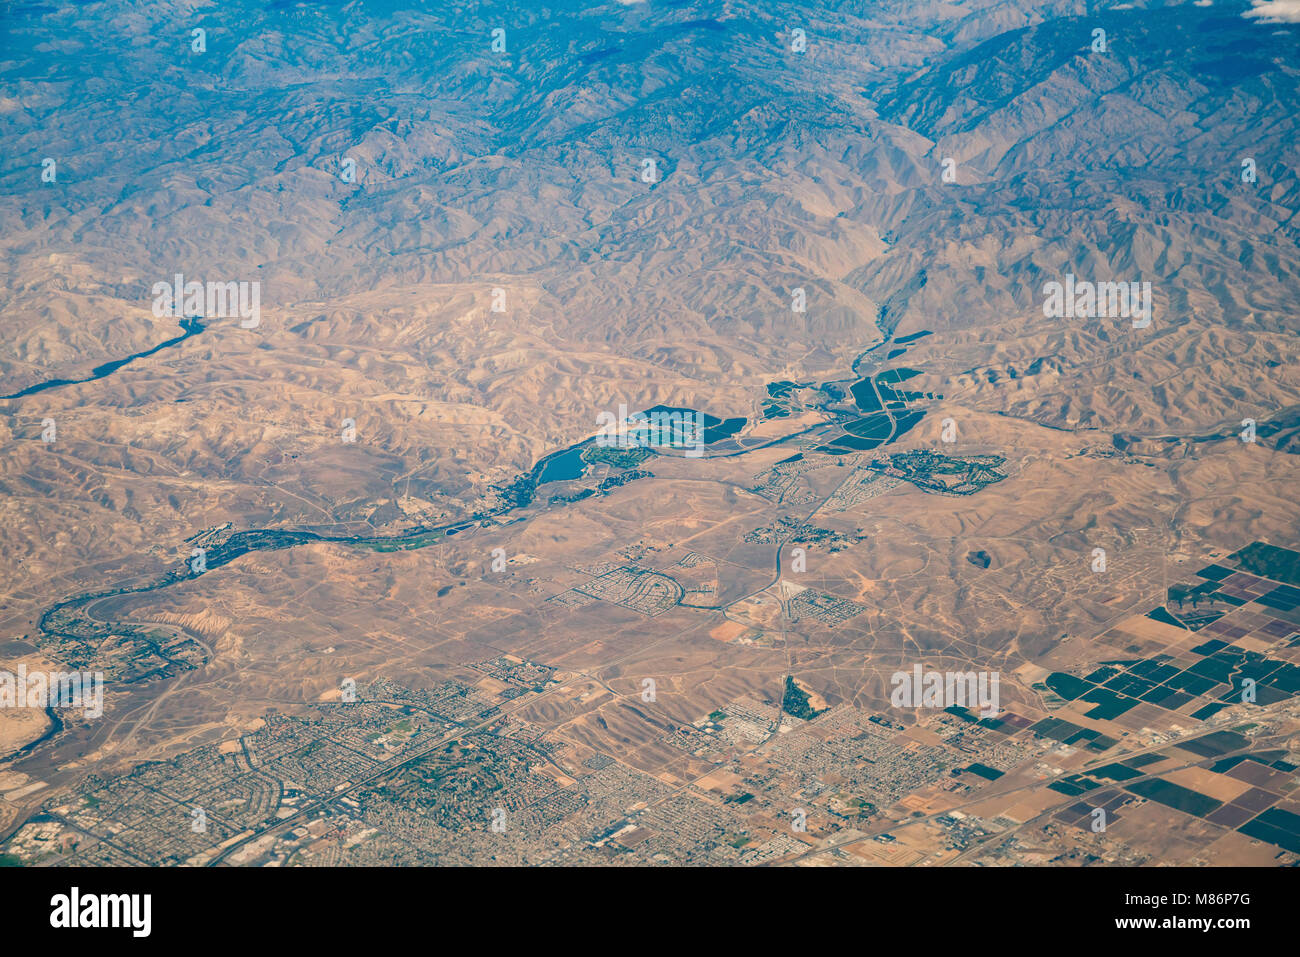 Aerial view of farm, landscape over Kern County from an airplane Stock Photo